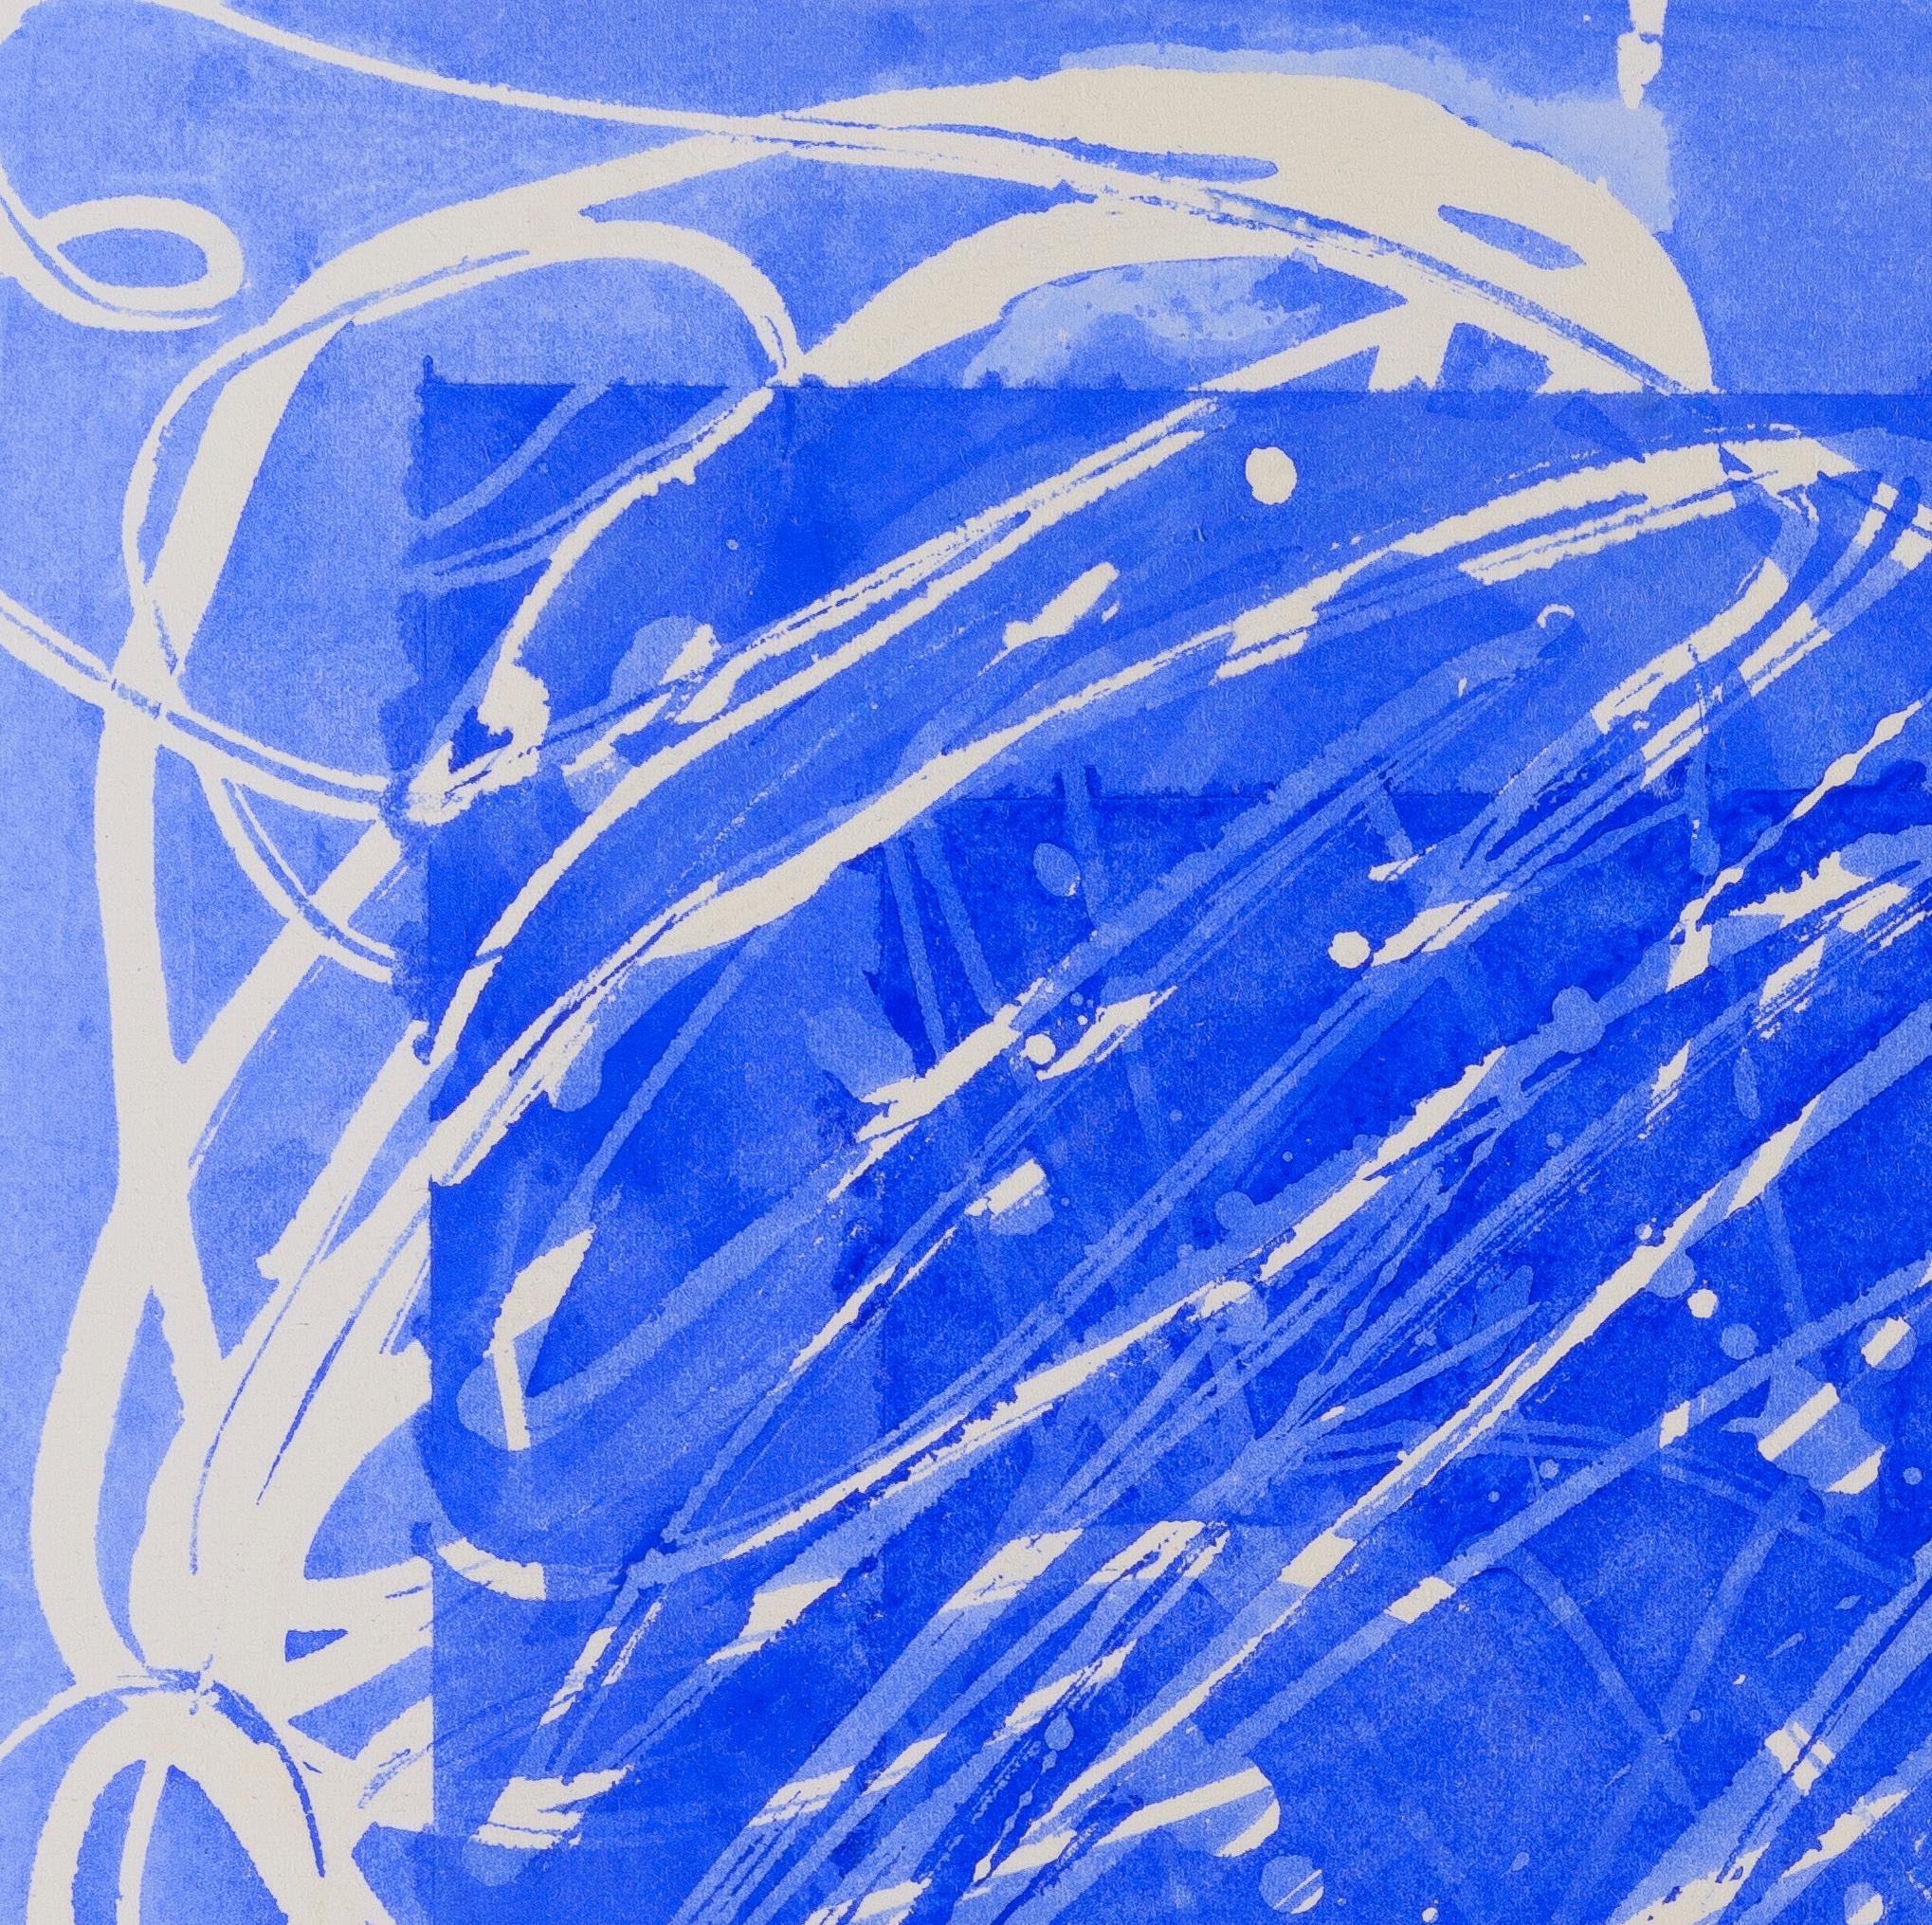 Gilded: abstract expressionist blue & white painting/drawing on paper, framed - Art by Paula Cahill